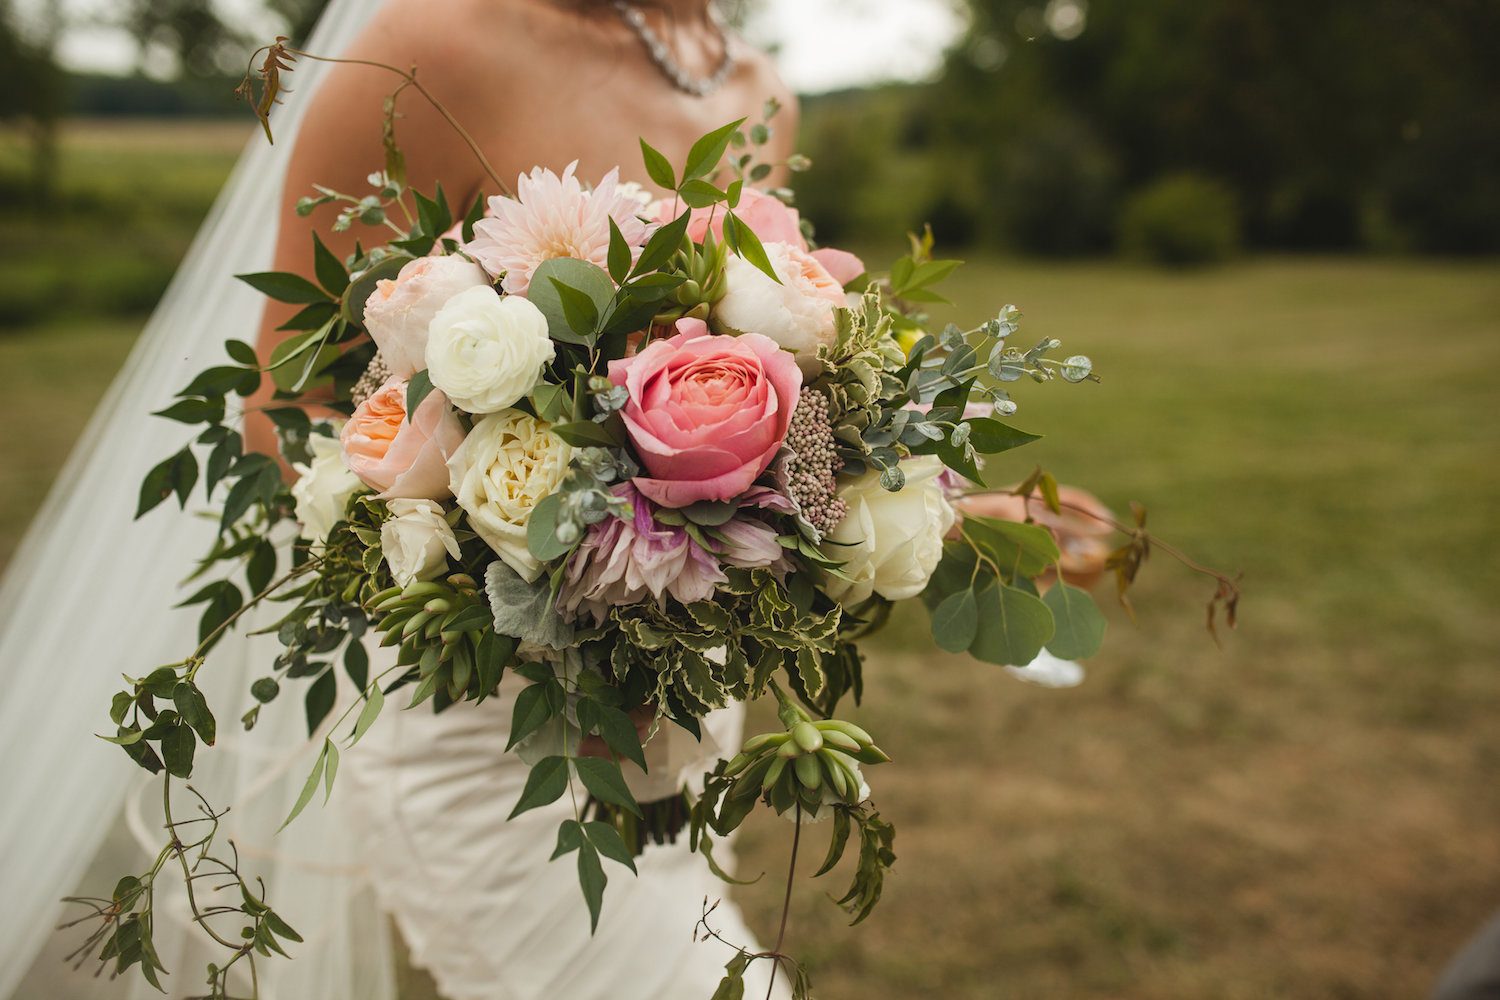 Jennifer loves the Ranunculus, Zinnia, Garden Roses and Rice Flower in the bouquet. Photography by Carly Romeo + Co.